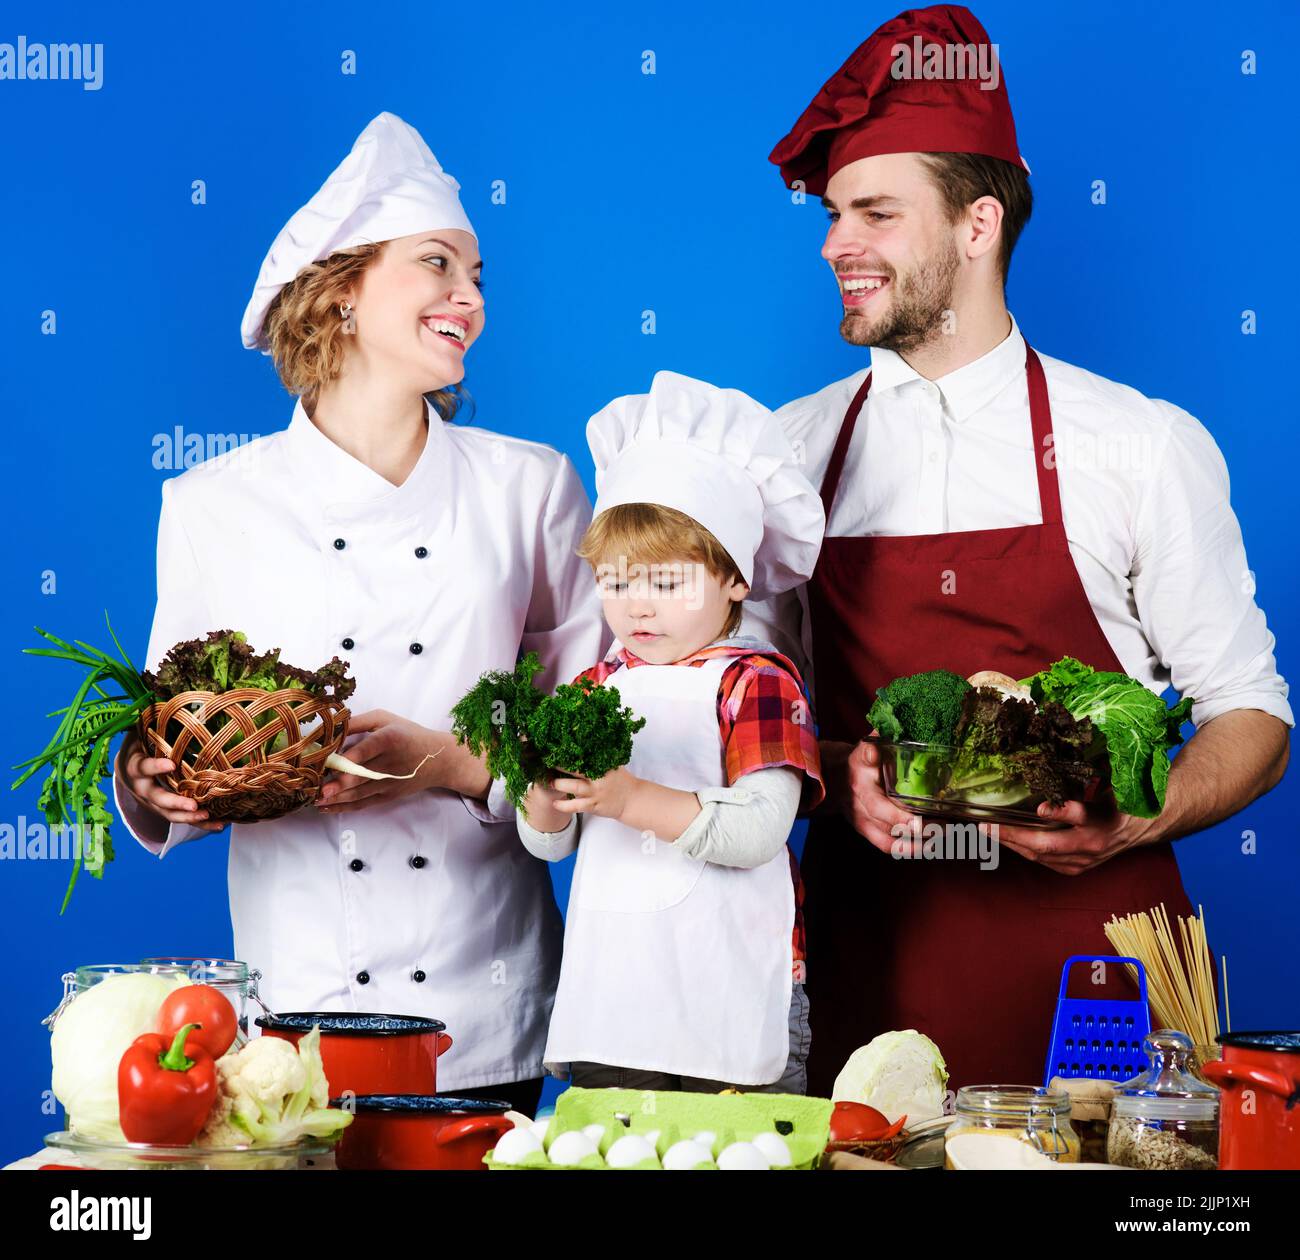 Cooking. Happy family preparing dinner together at kitchen. Parents teaching little son how to cook. Stock Photo